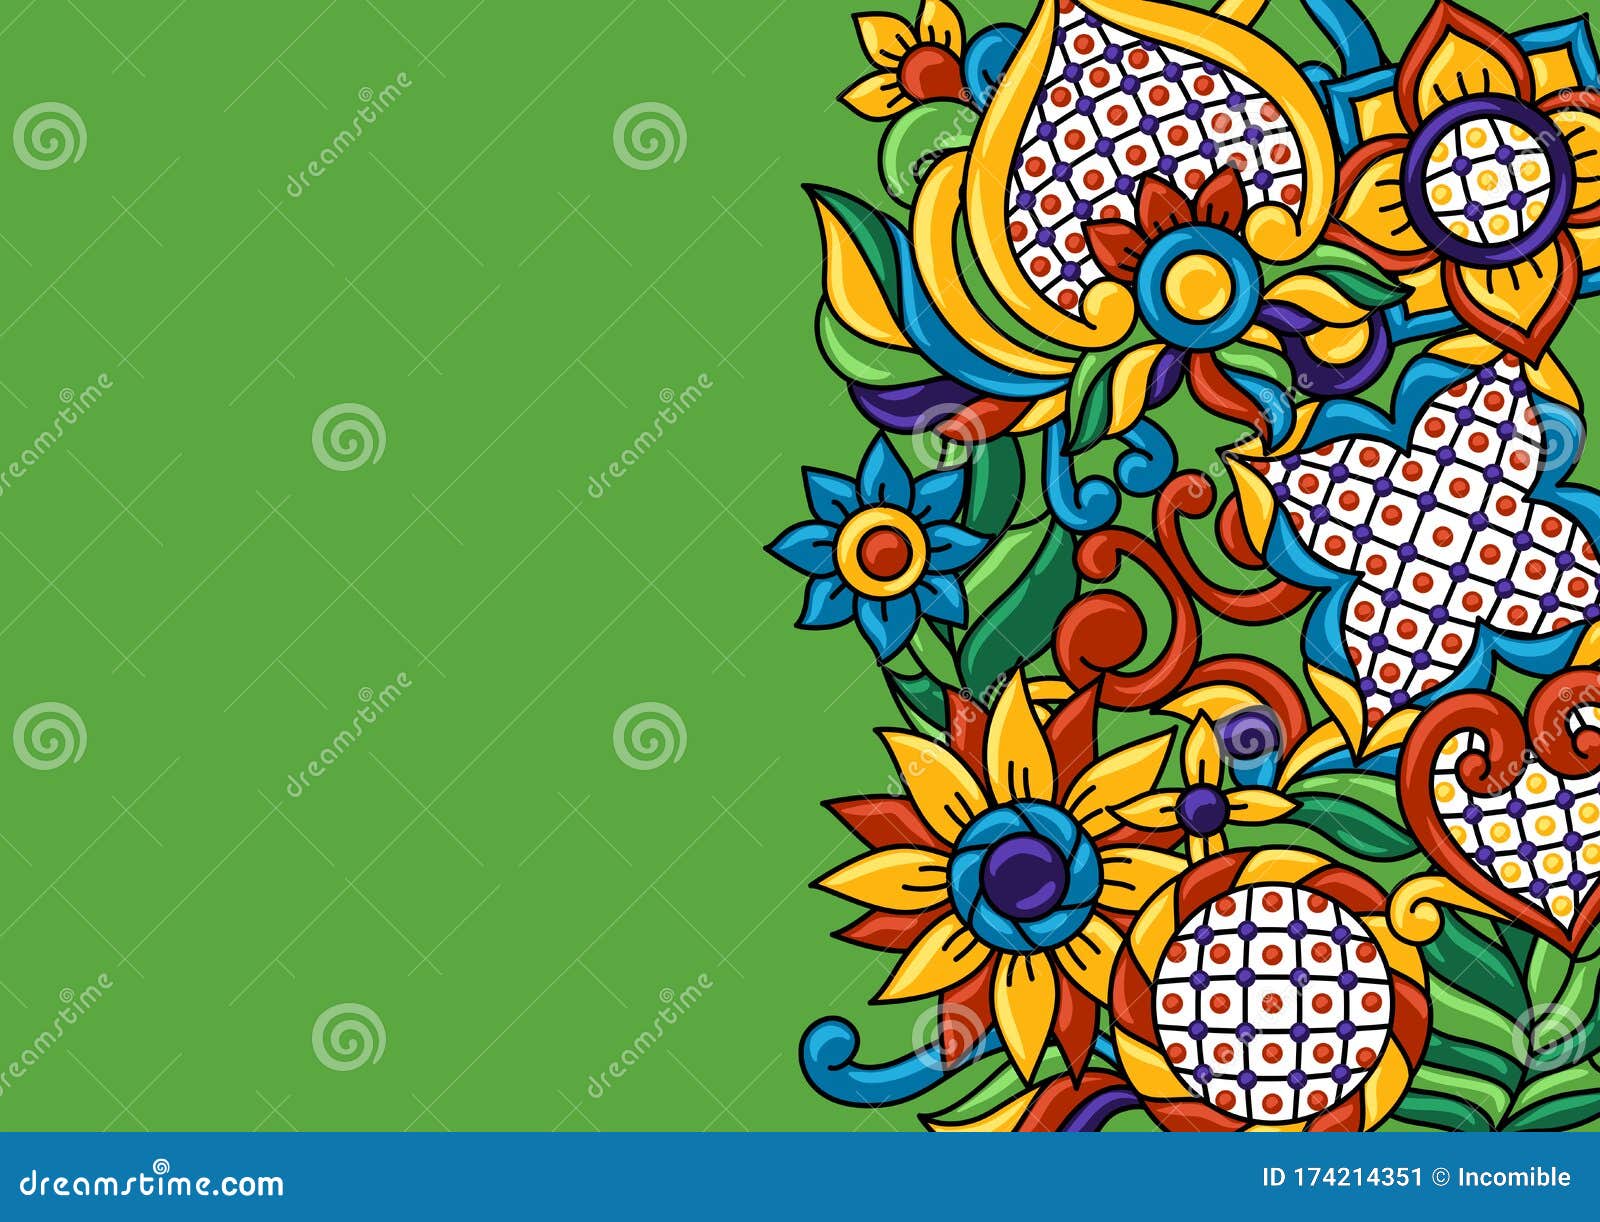 background with mexican talavera pattern. decoration with ornamental flowers.